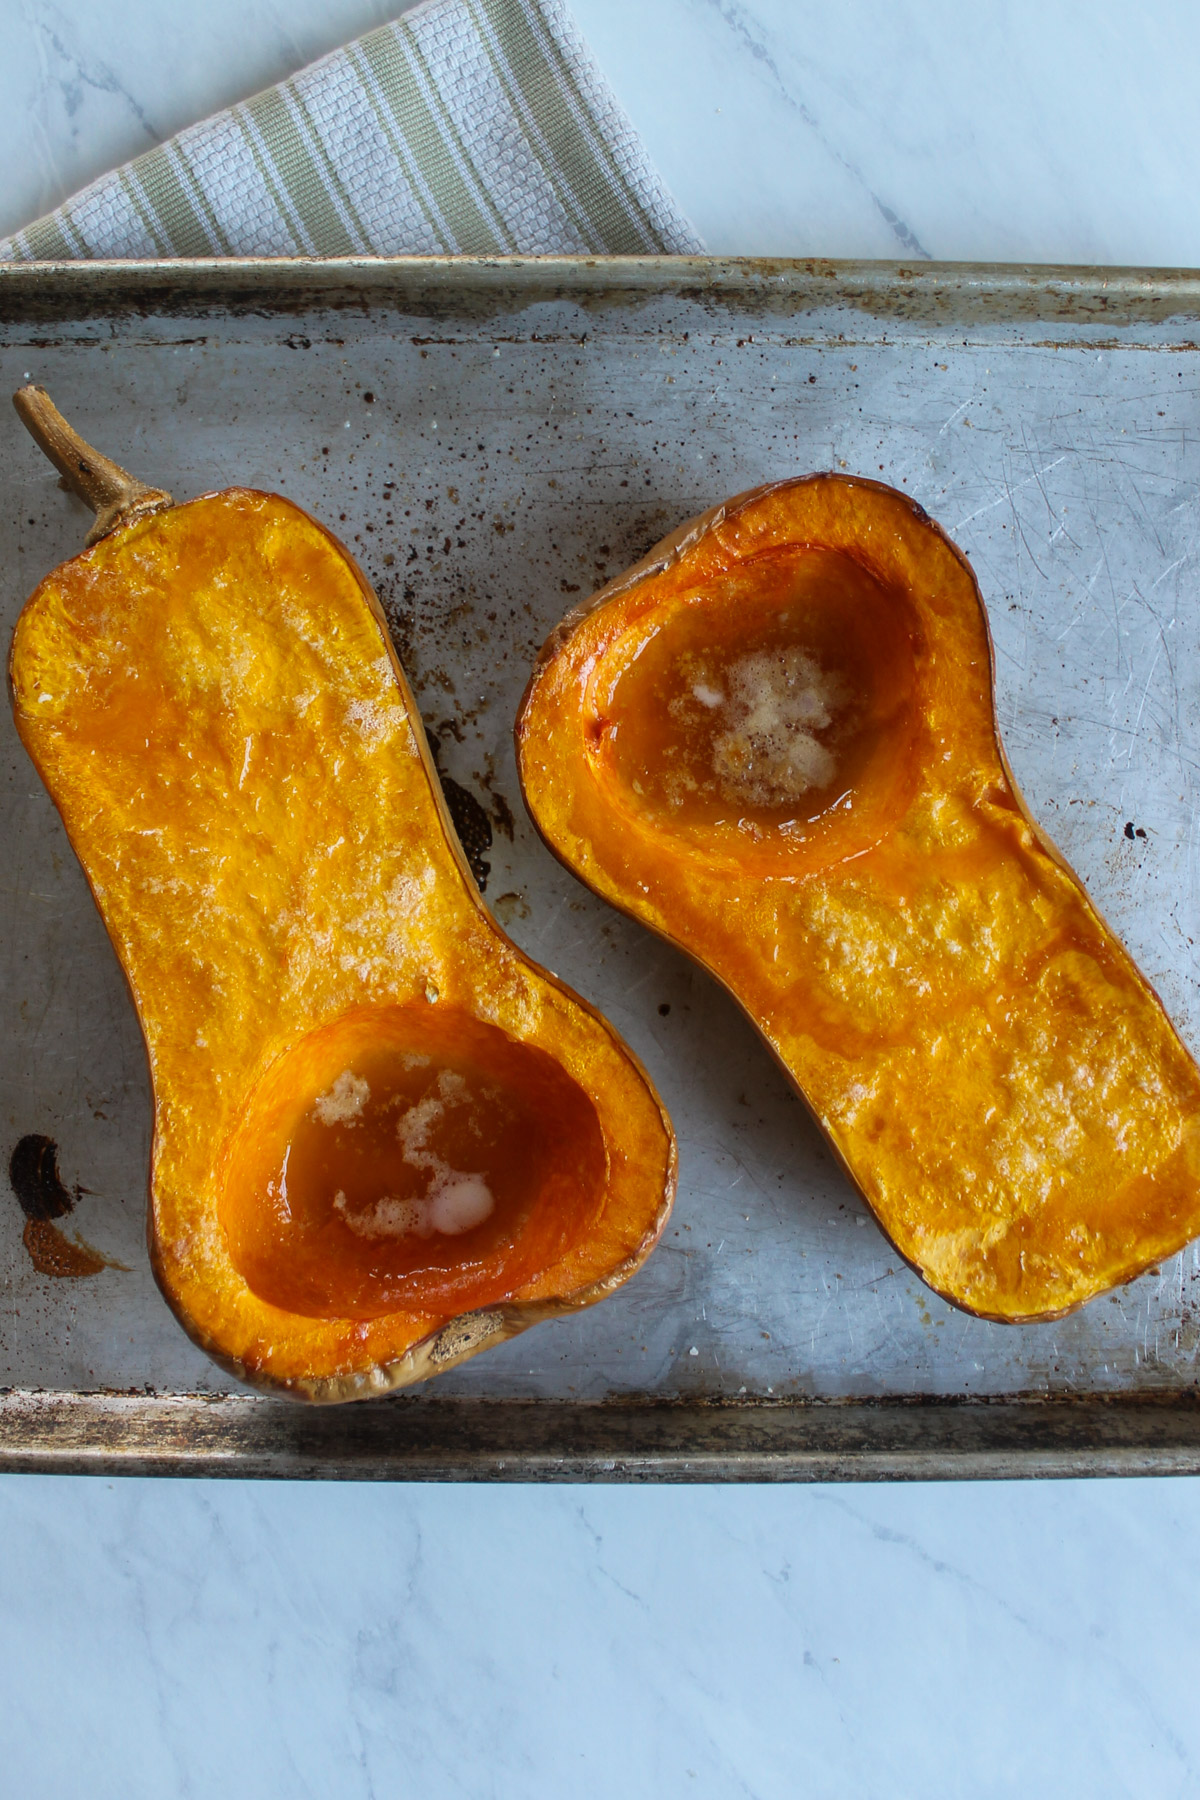 Two halves of roasted butternut squash on a sheet pan.